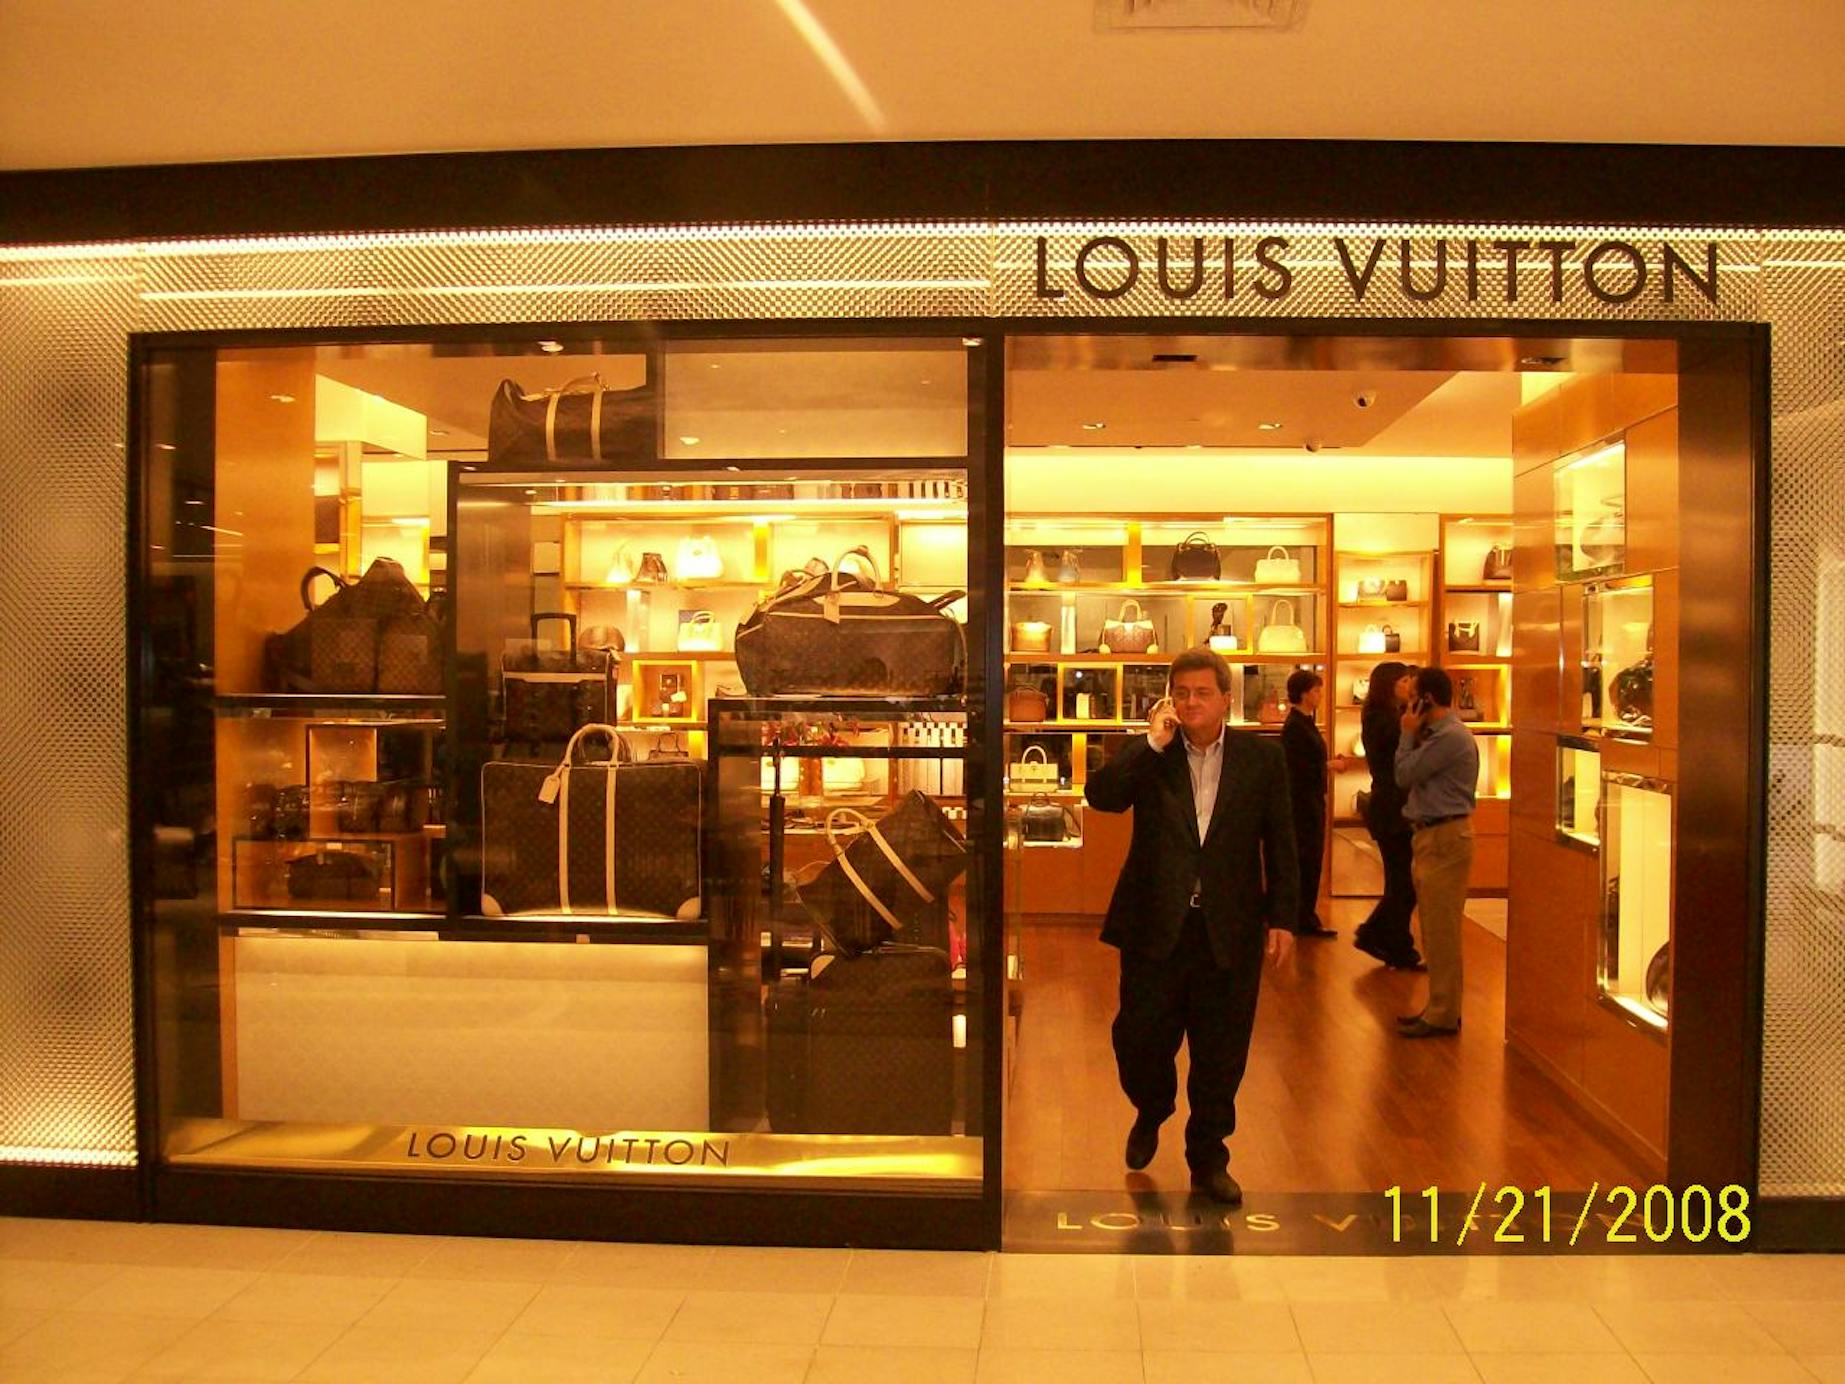  Louis  Vuitton  Retail Store  Eric Owes Archinect